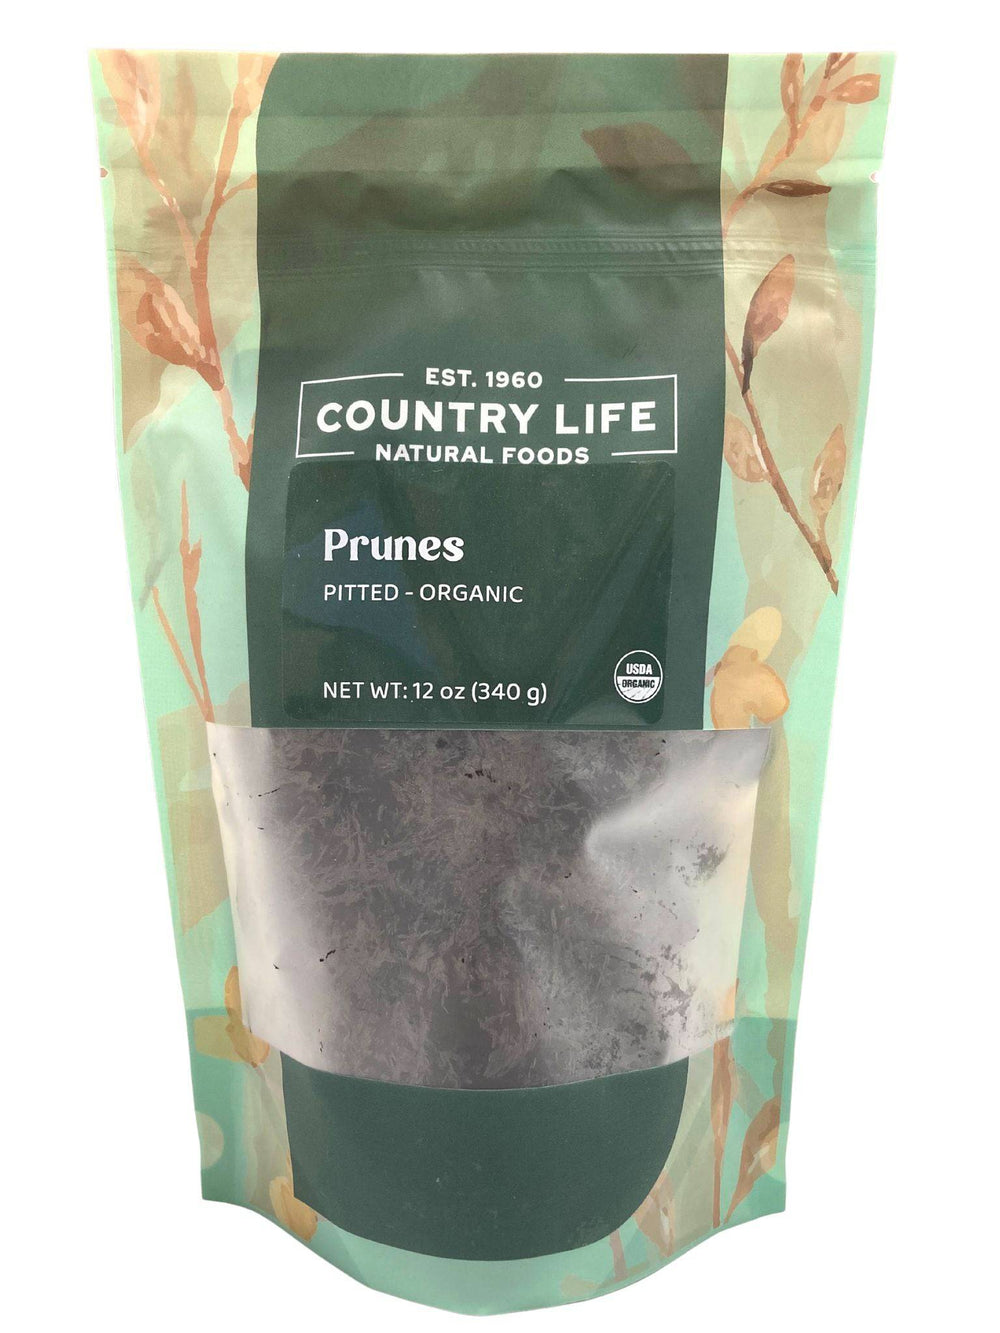 Organic Prunes, Pitted - Country Life Natural Foods